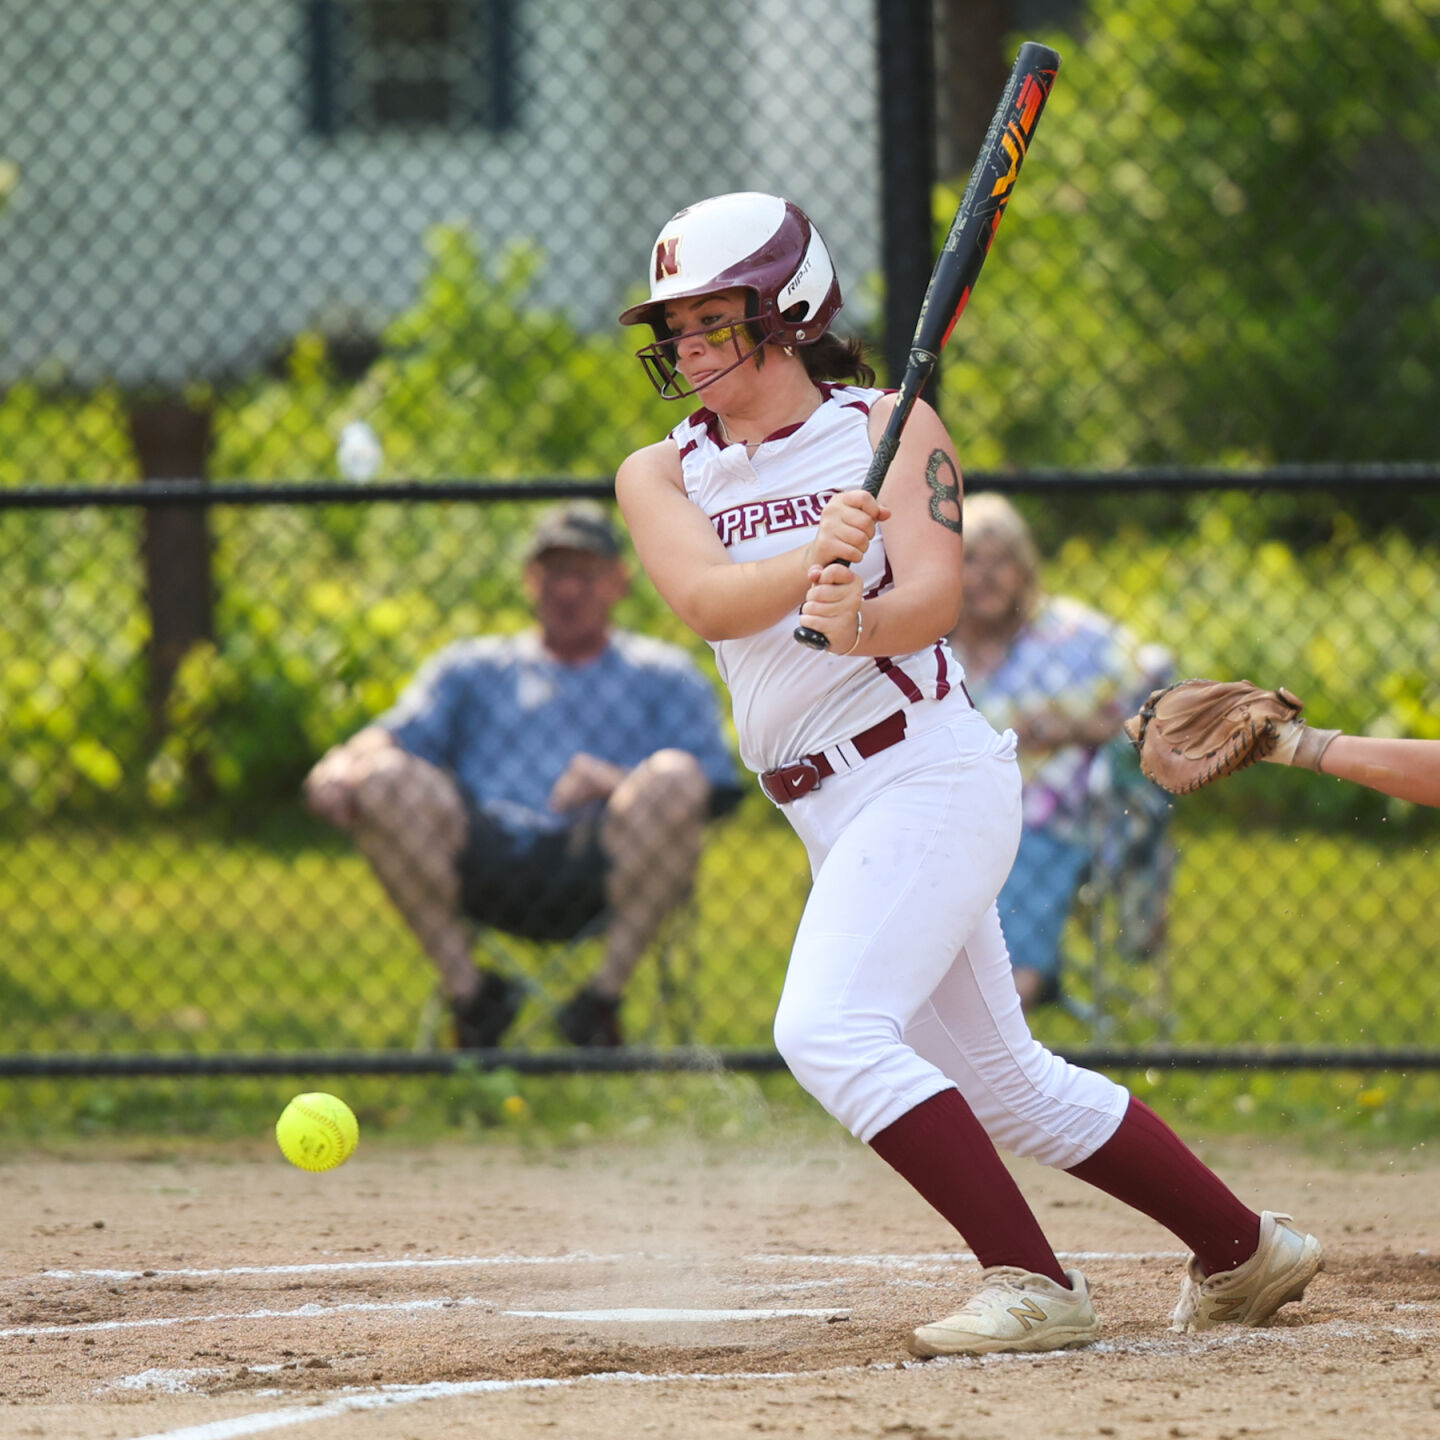 Top Softball Players: Leaders in Batting Average, Runs, RBIs, and Home Runs